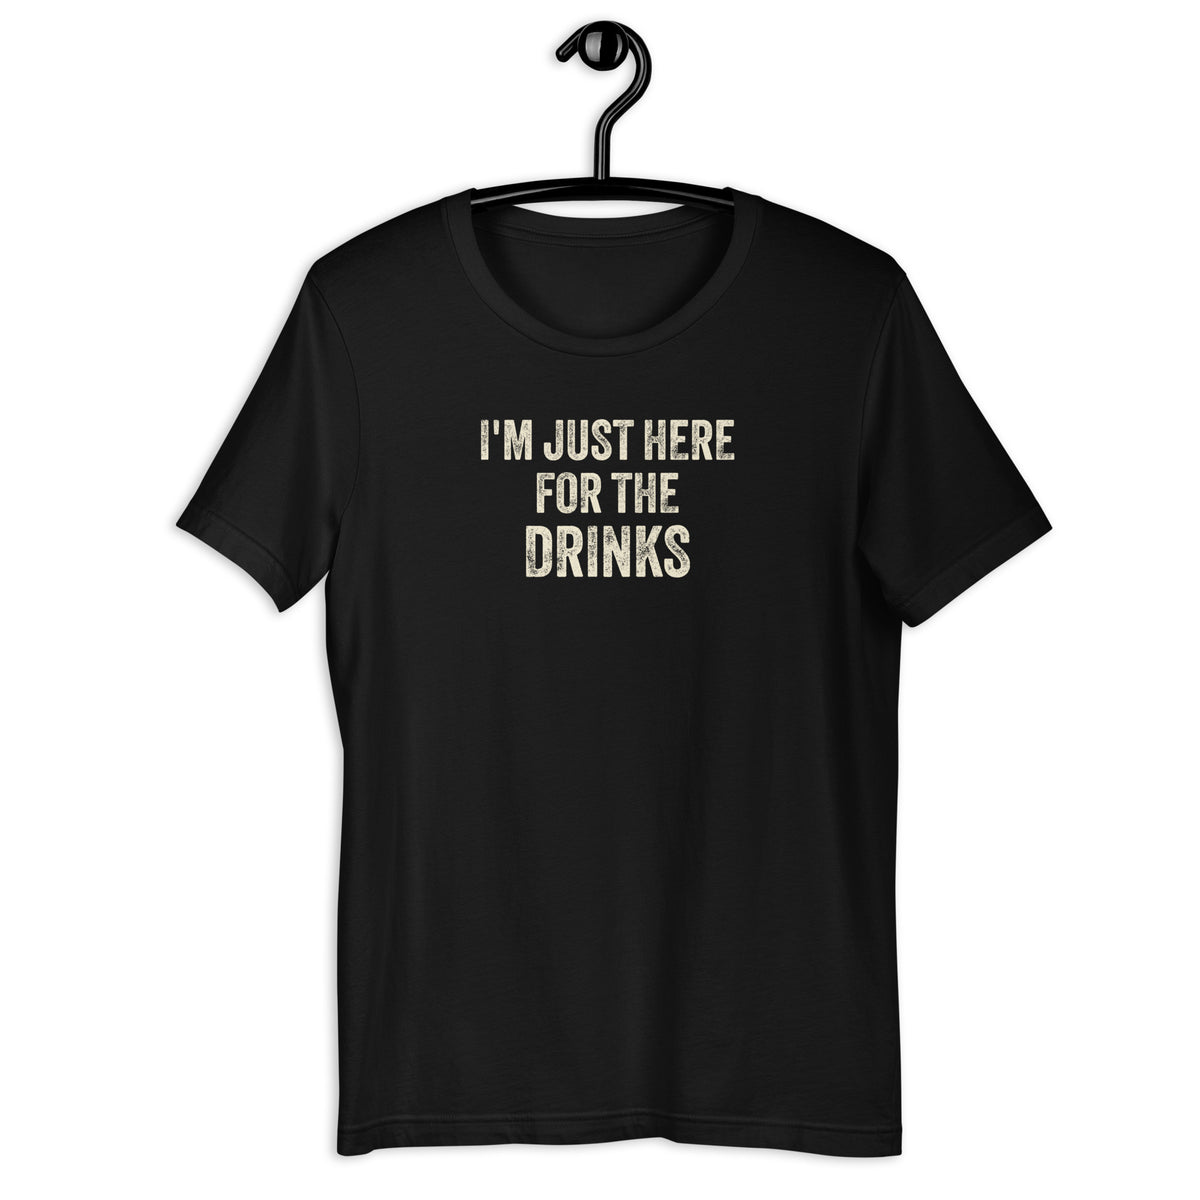 I'm Just Here for the Drinks tequila beer T-shirt - SHOPNOO